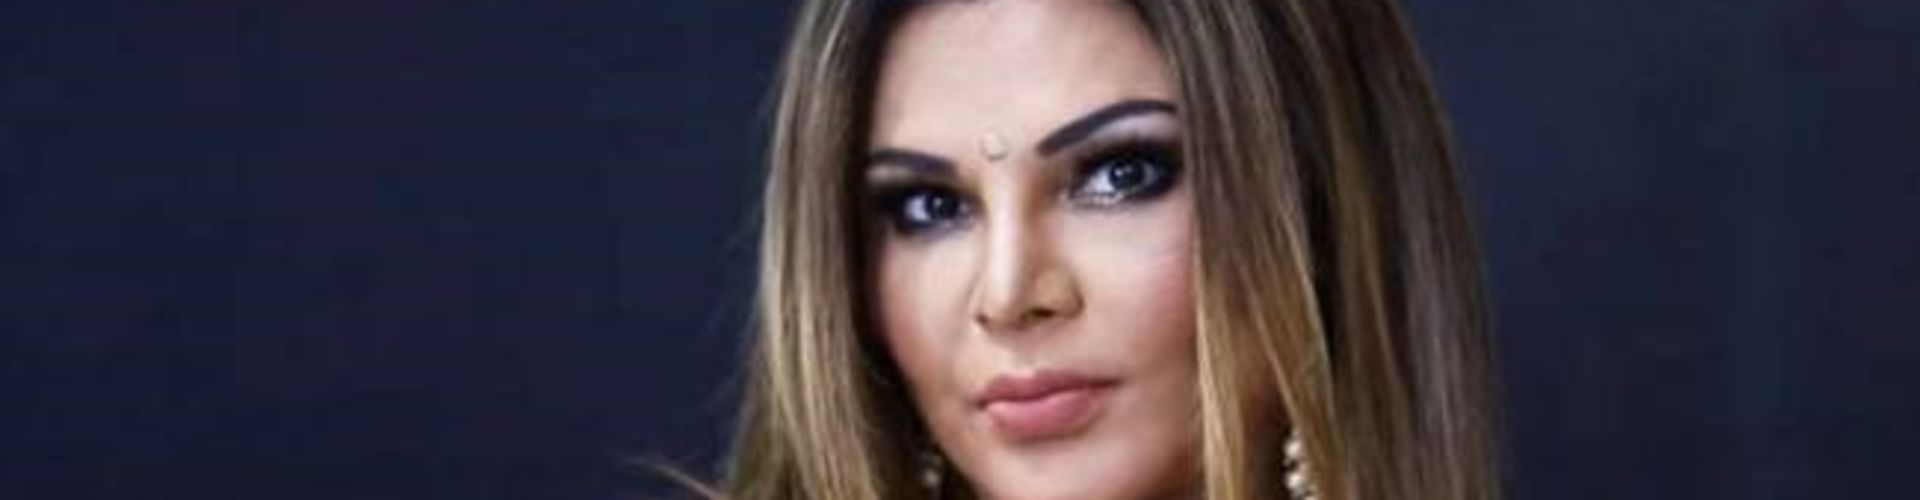 One Should Also Check The Background Of Accusers Says Rakhi Sawant Supporting Raj Kundra And Shilpa Shetty